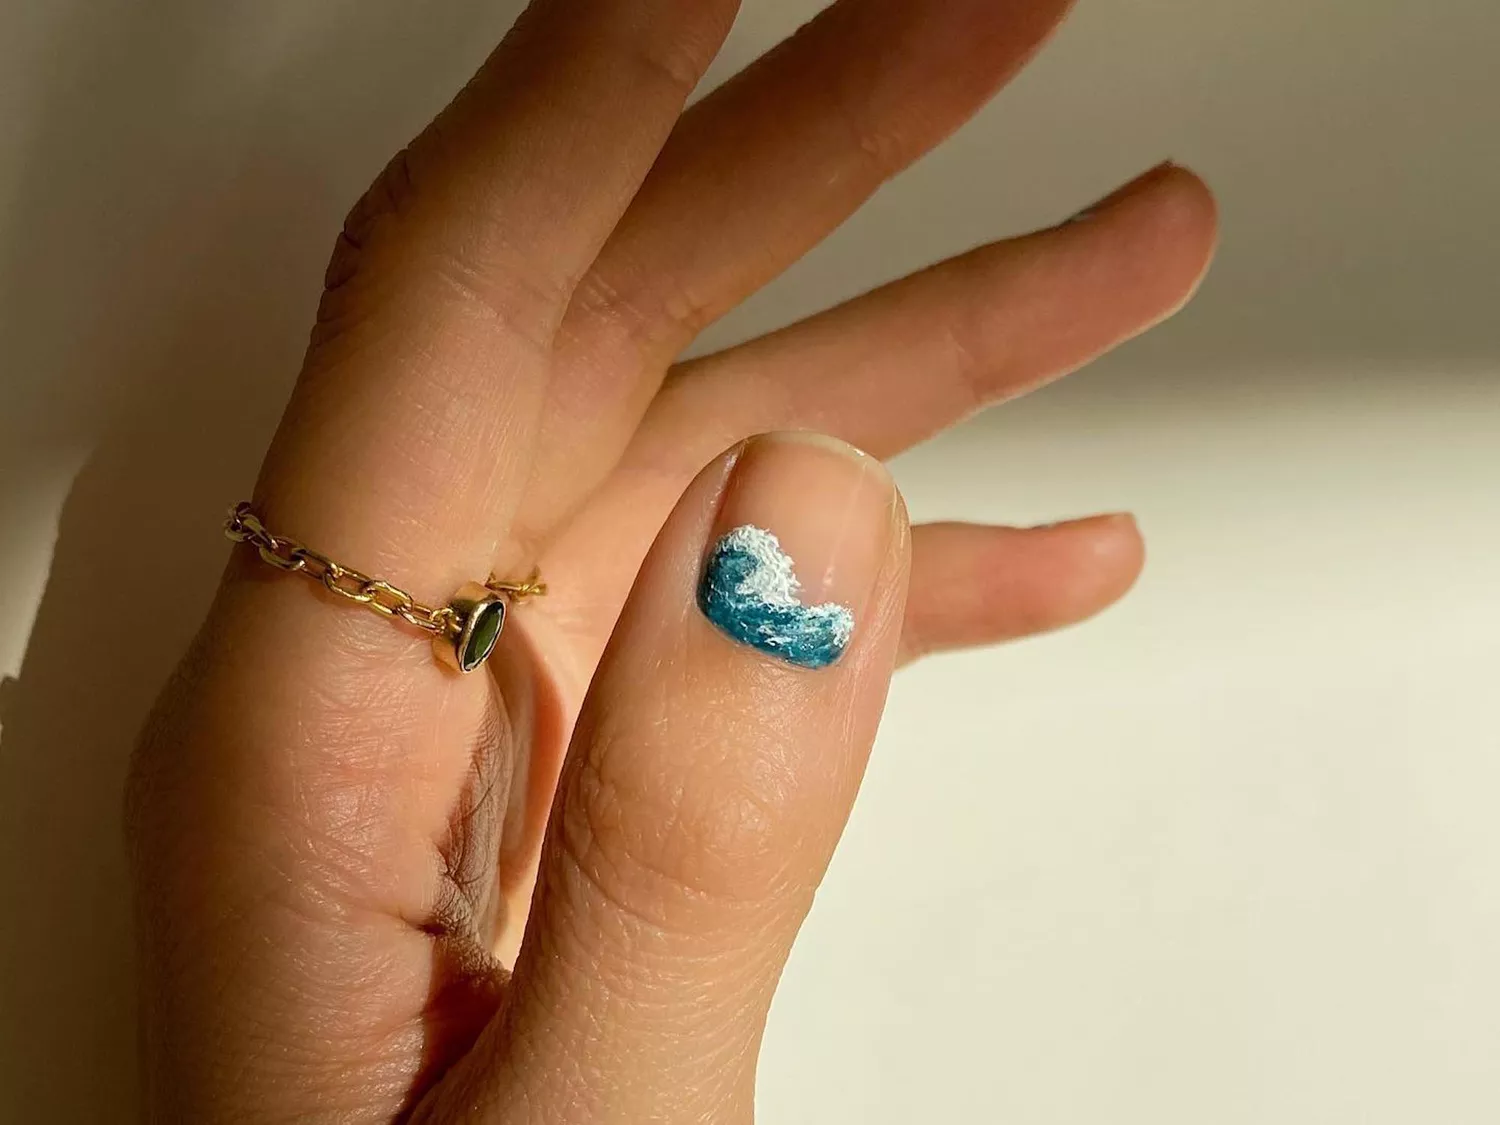 Manicure with neutral base and intricate ocean wave design on thumbnail